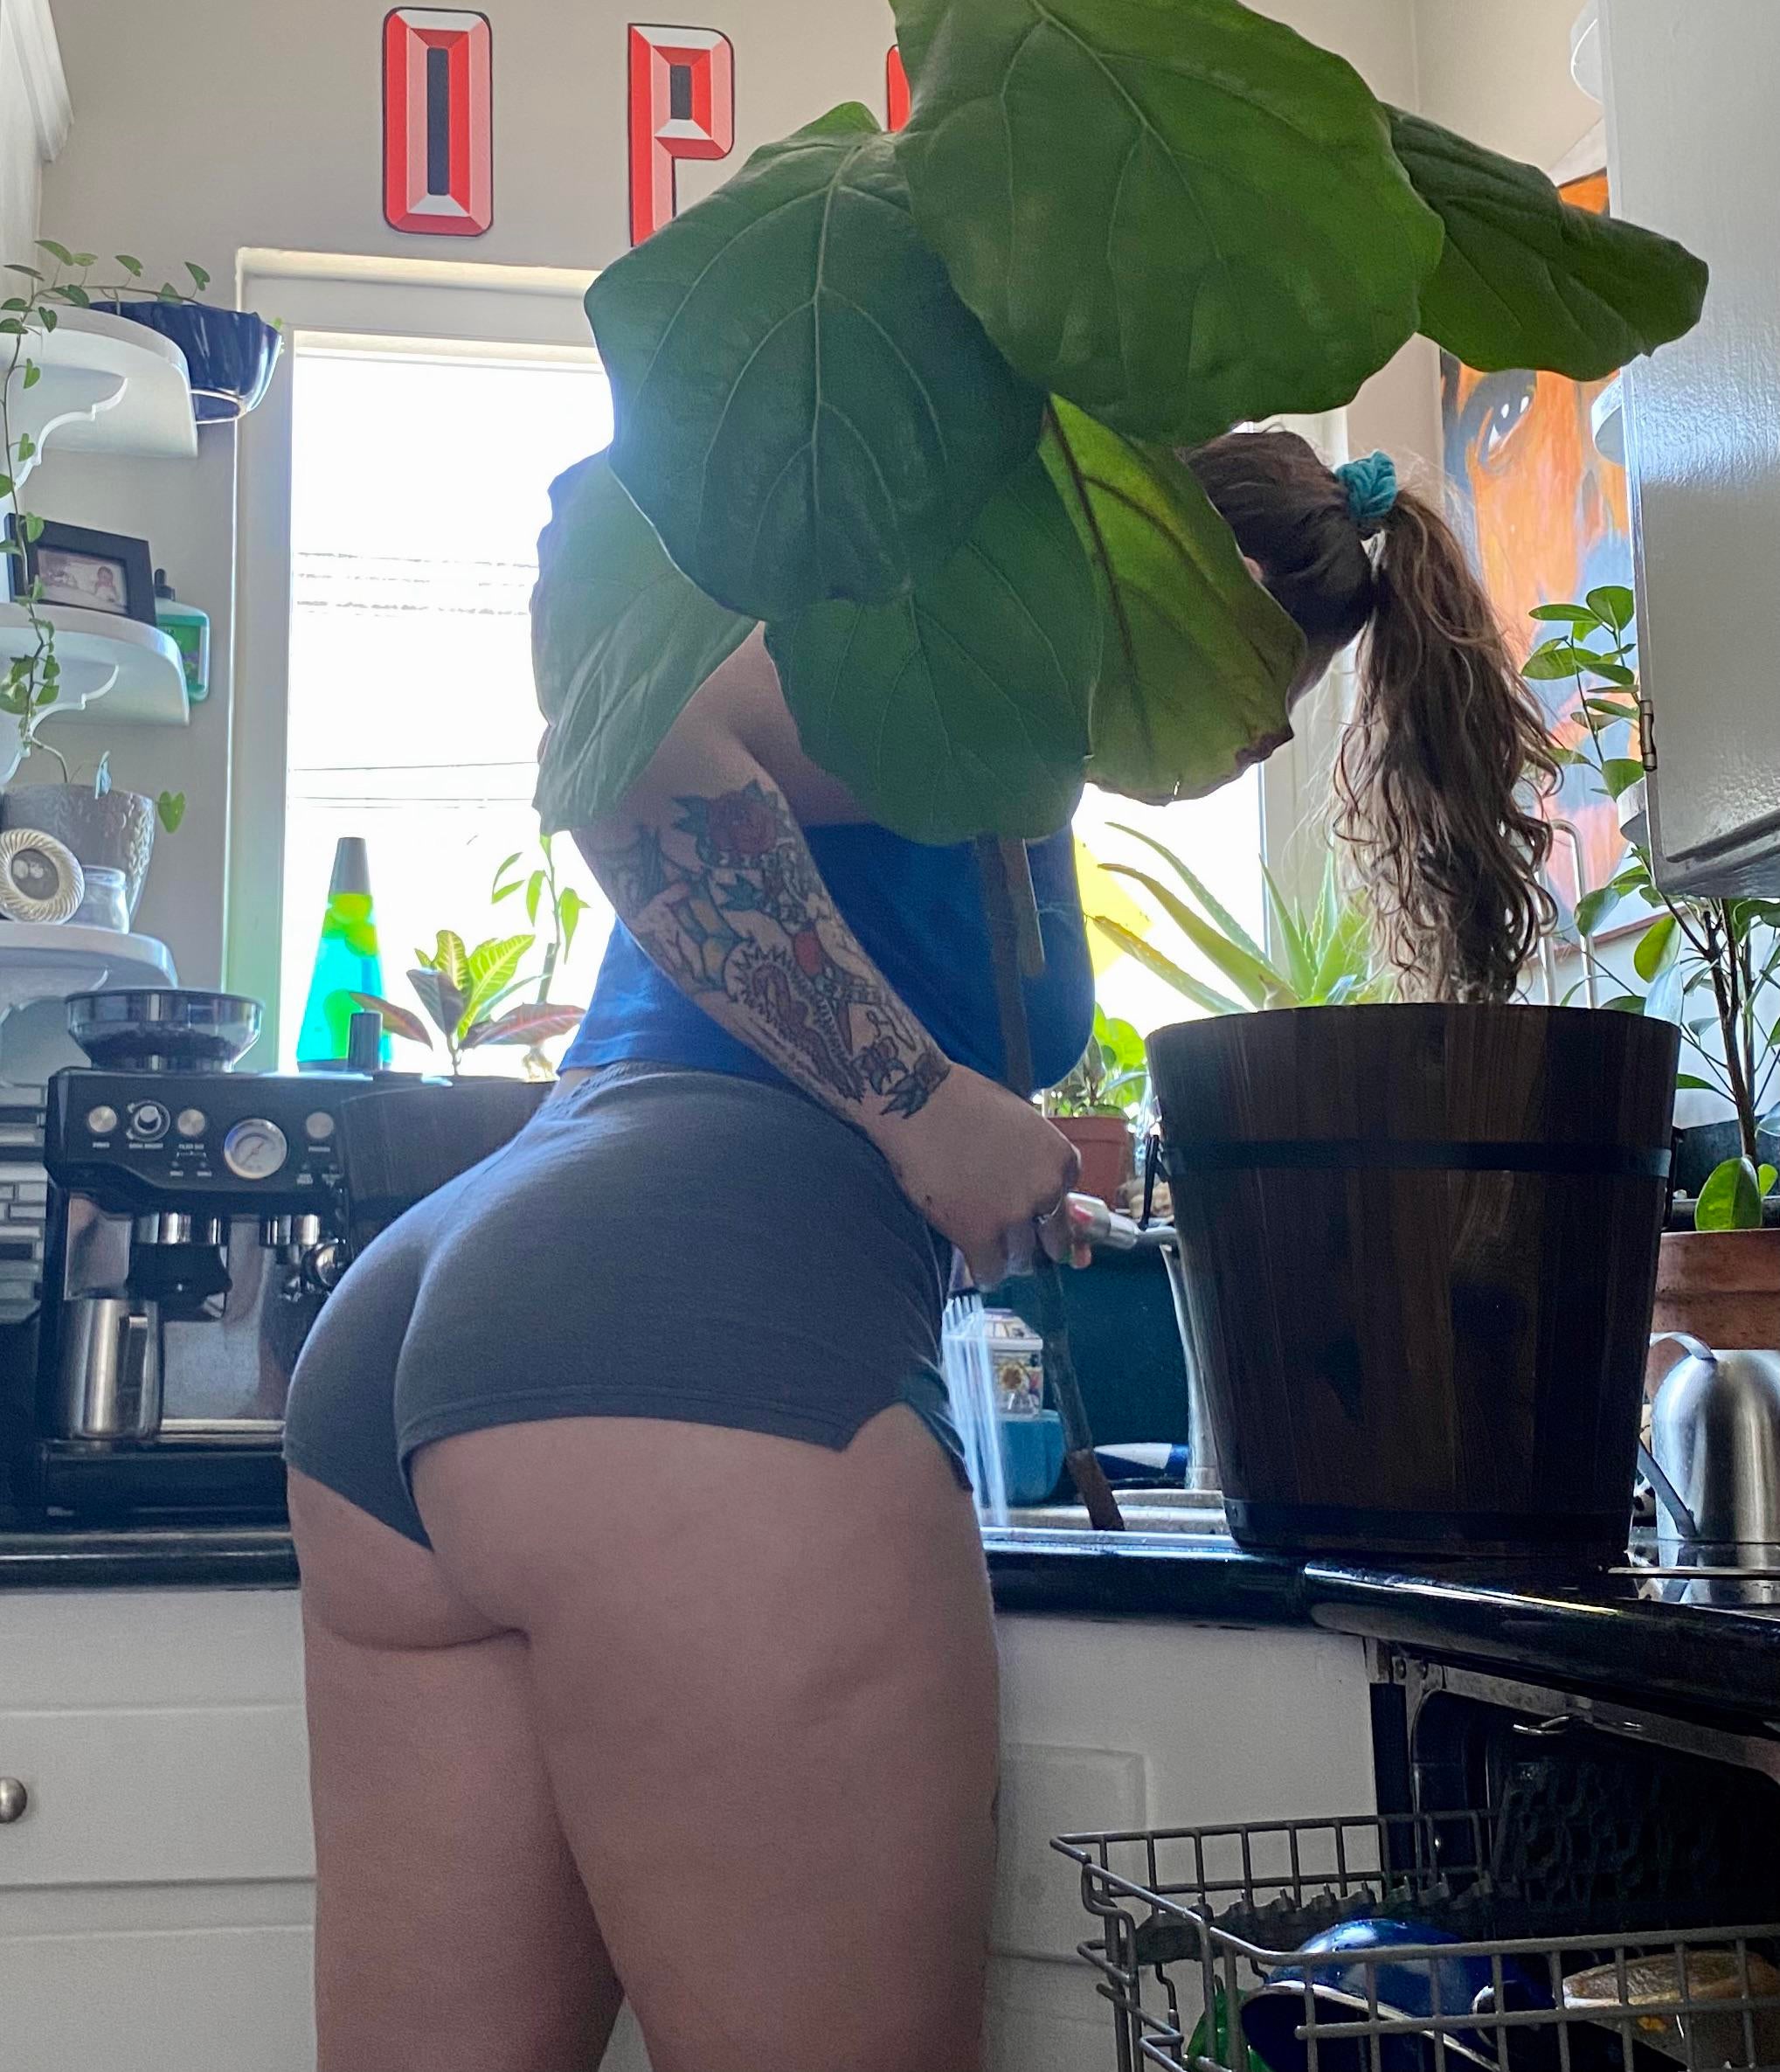 PAWG A lot going on in this picture but please